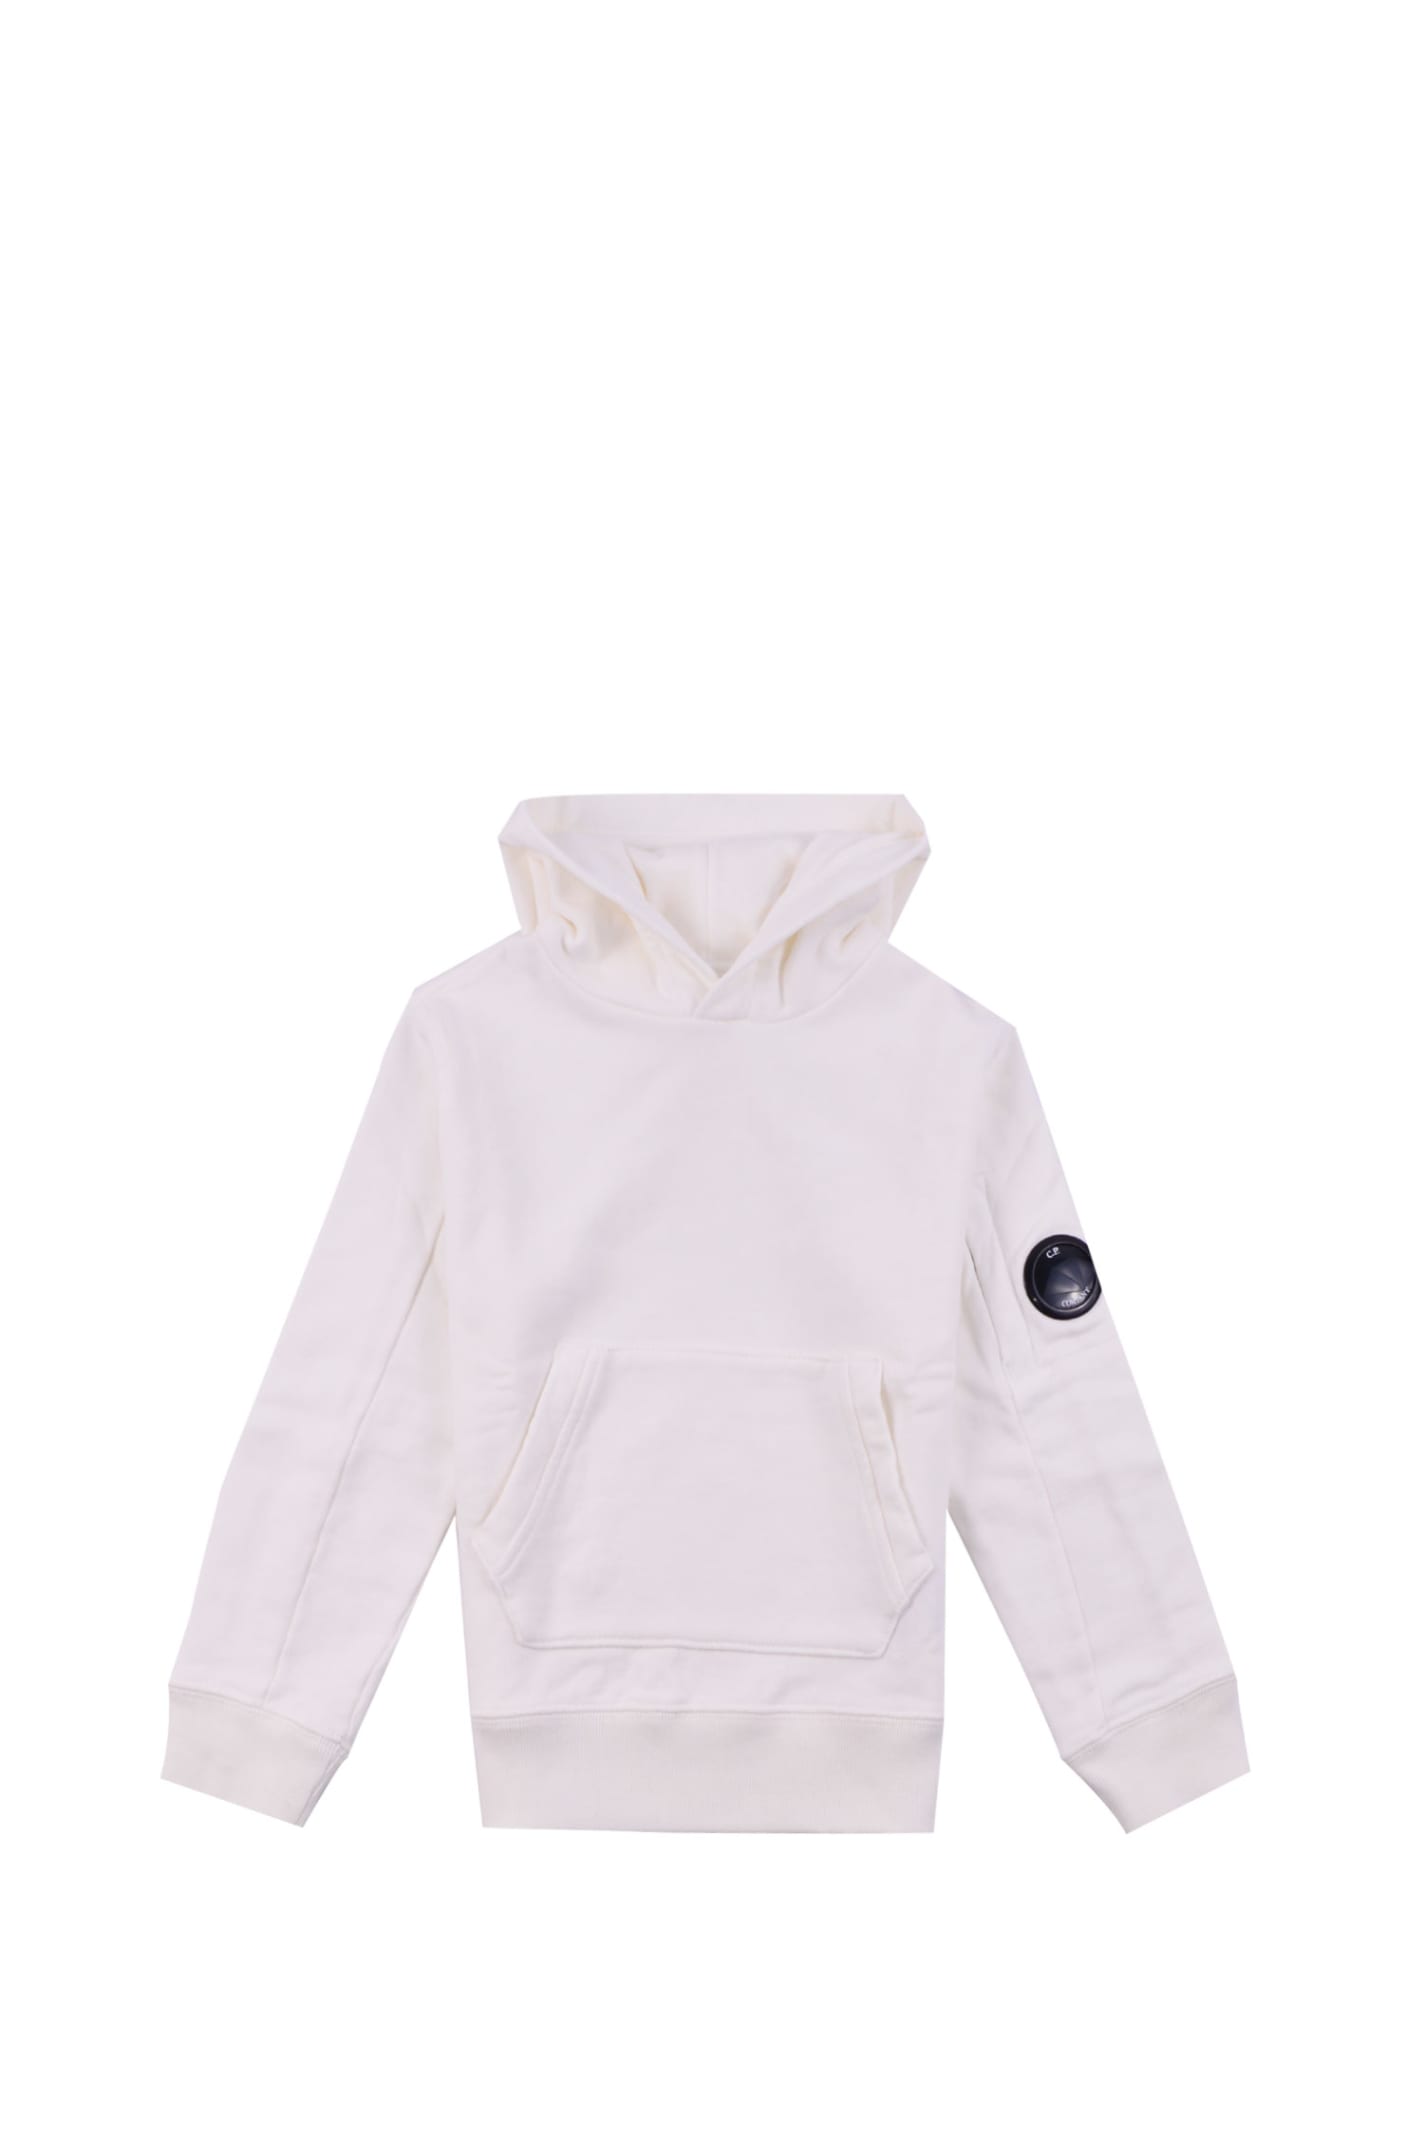 C.p. Company Kids' Cotton Hoodie In White